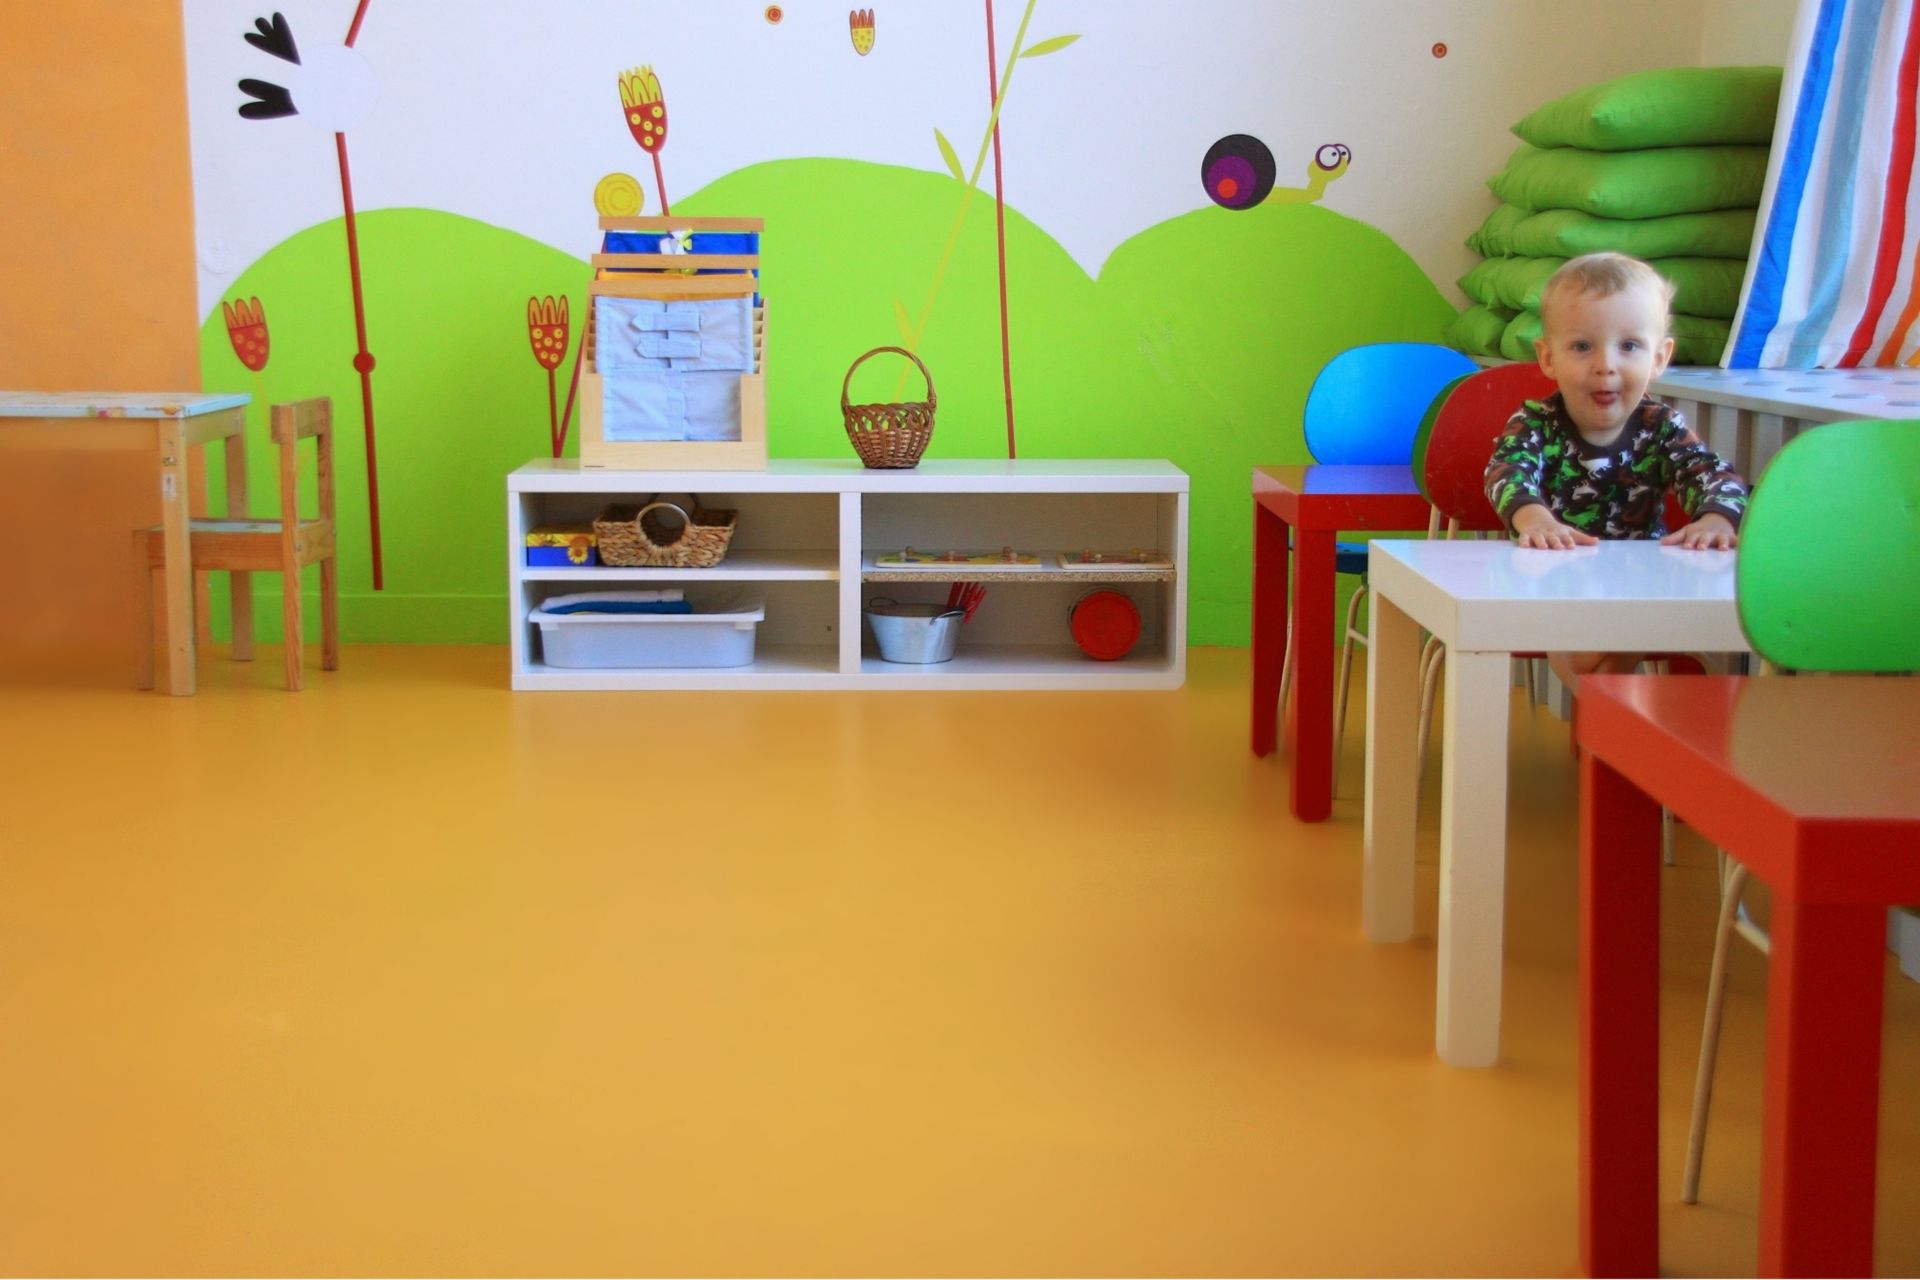 Sika ComfortFloor® orange floor in daycare with baby sitting on chair